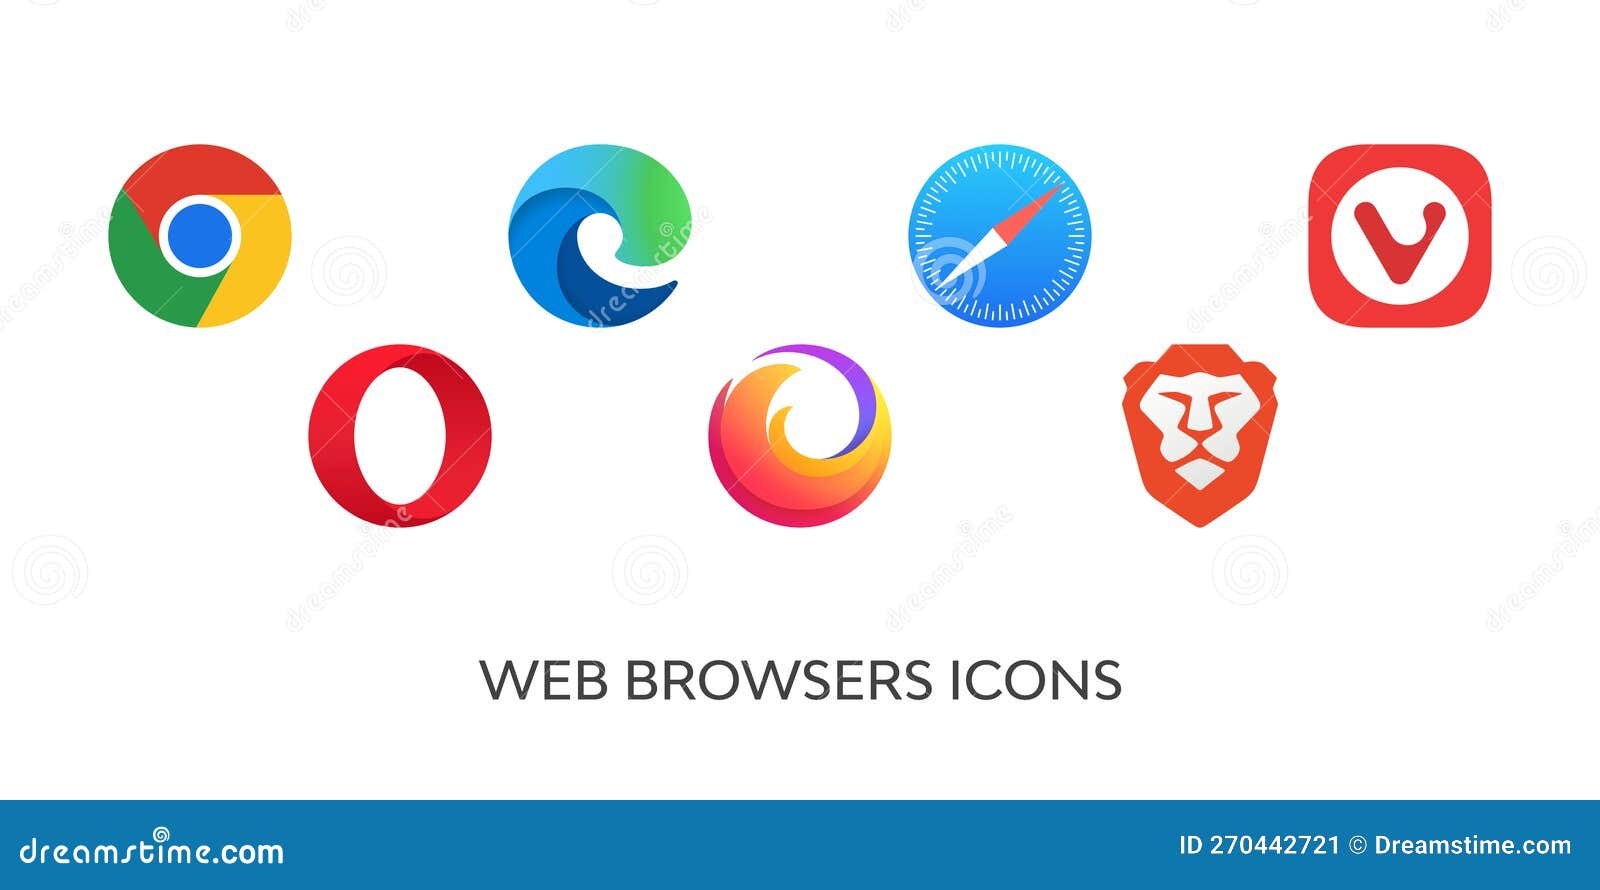 Browser Icon by Bharath Prabhuswamy